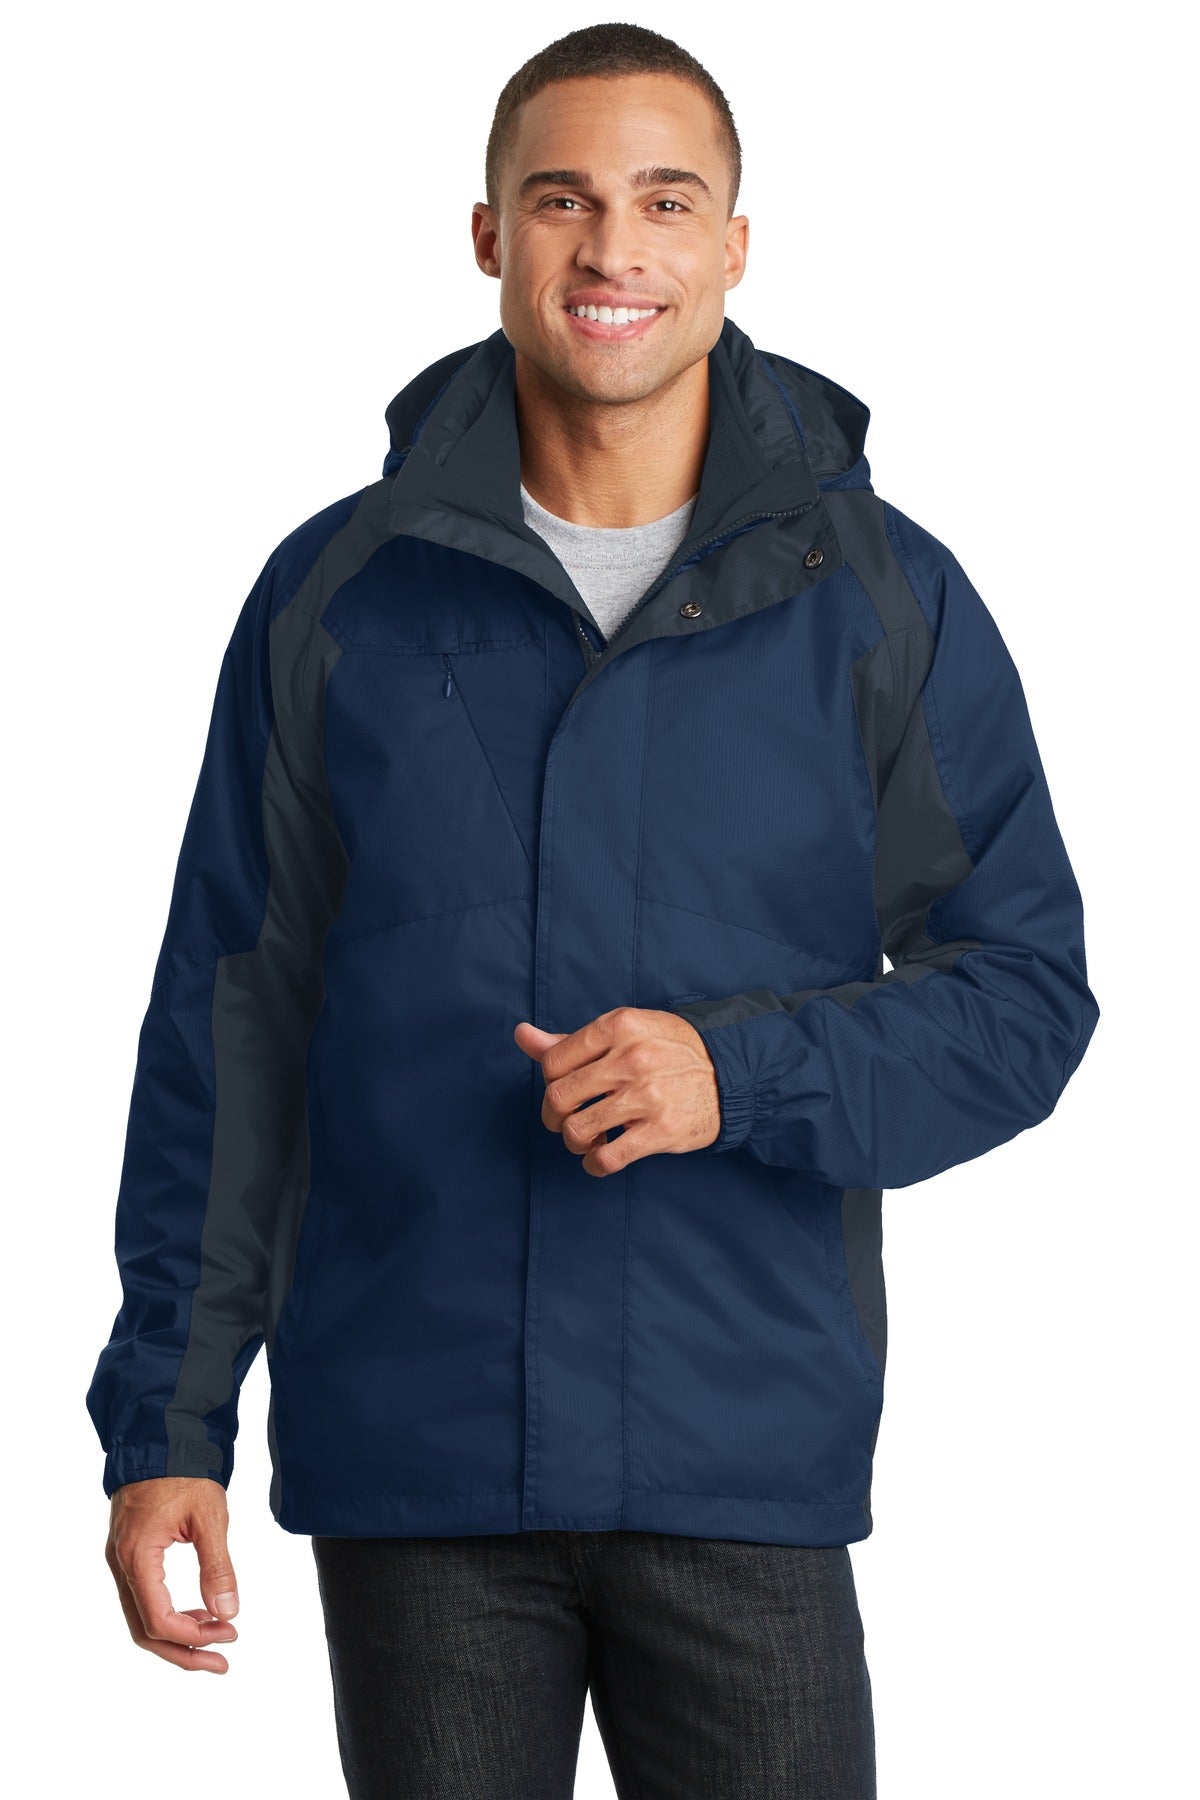 Outerwear Insignia Blue/ Navy Eclipse Port Authority